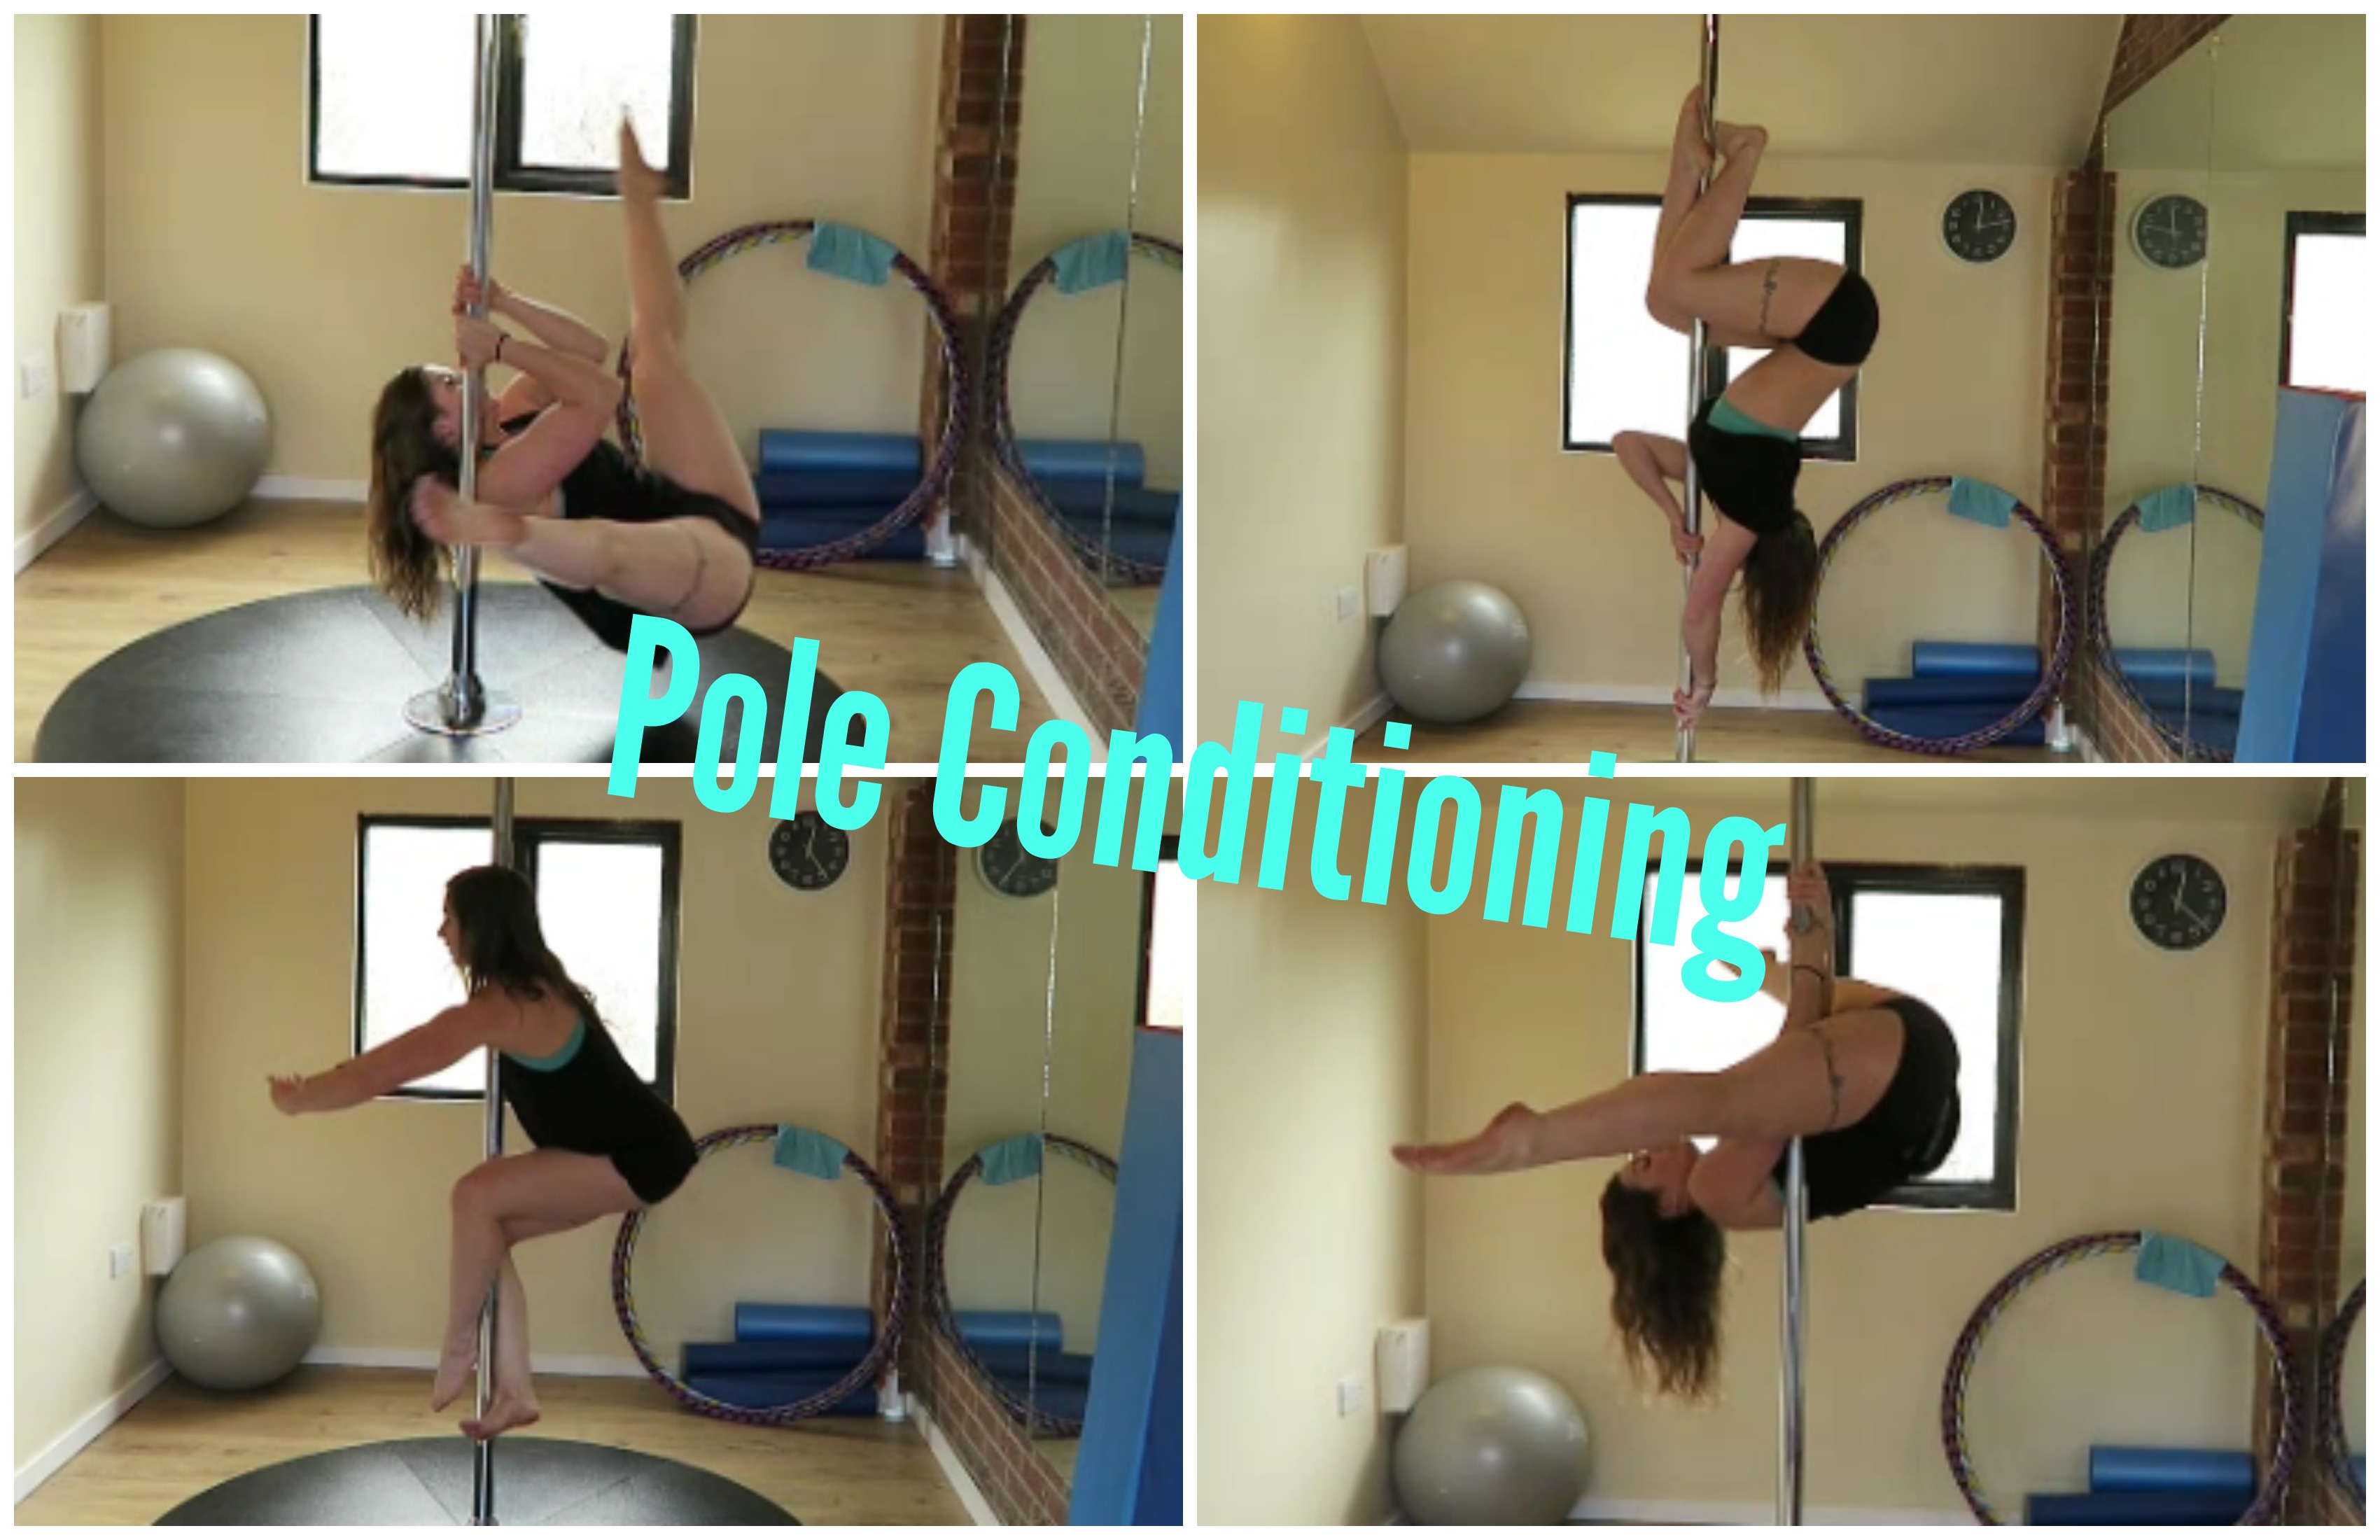 https://www.uniqueaerialists.com/content/images/2017/01/Pole-conditioning.jpg